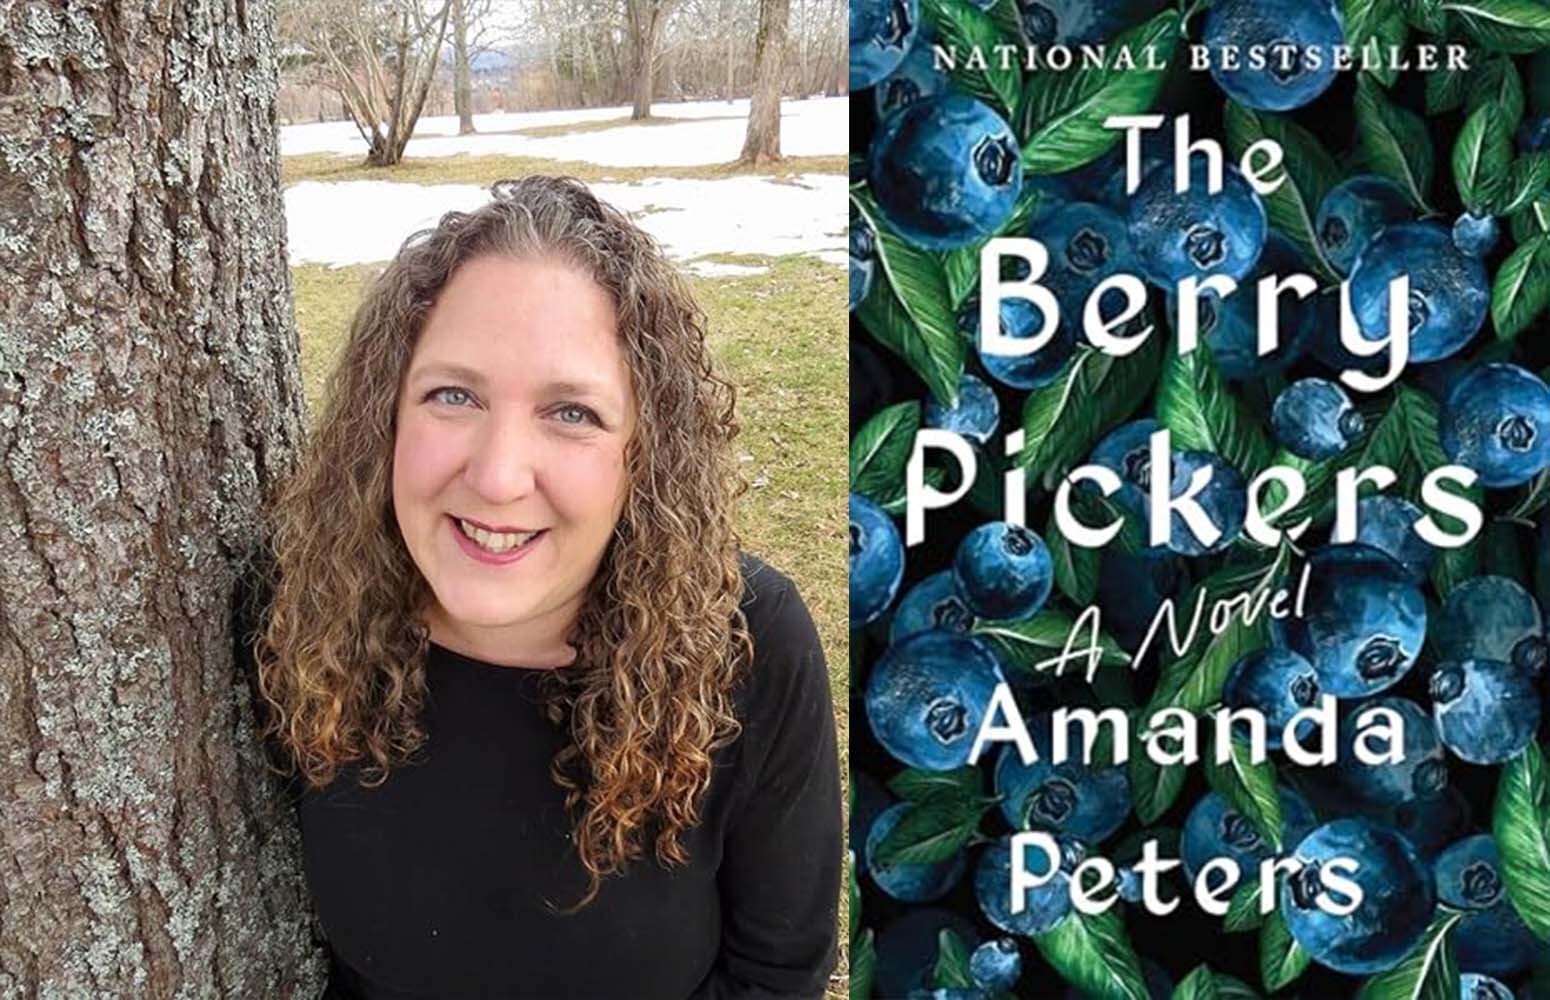 Headshot photo of Amanda Peters next to the cover of her novel, "The Berry Pickers."